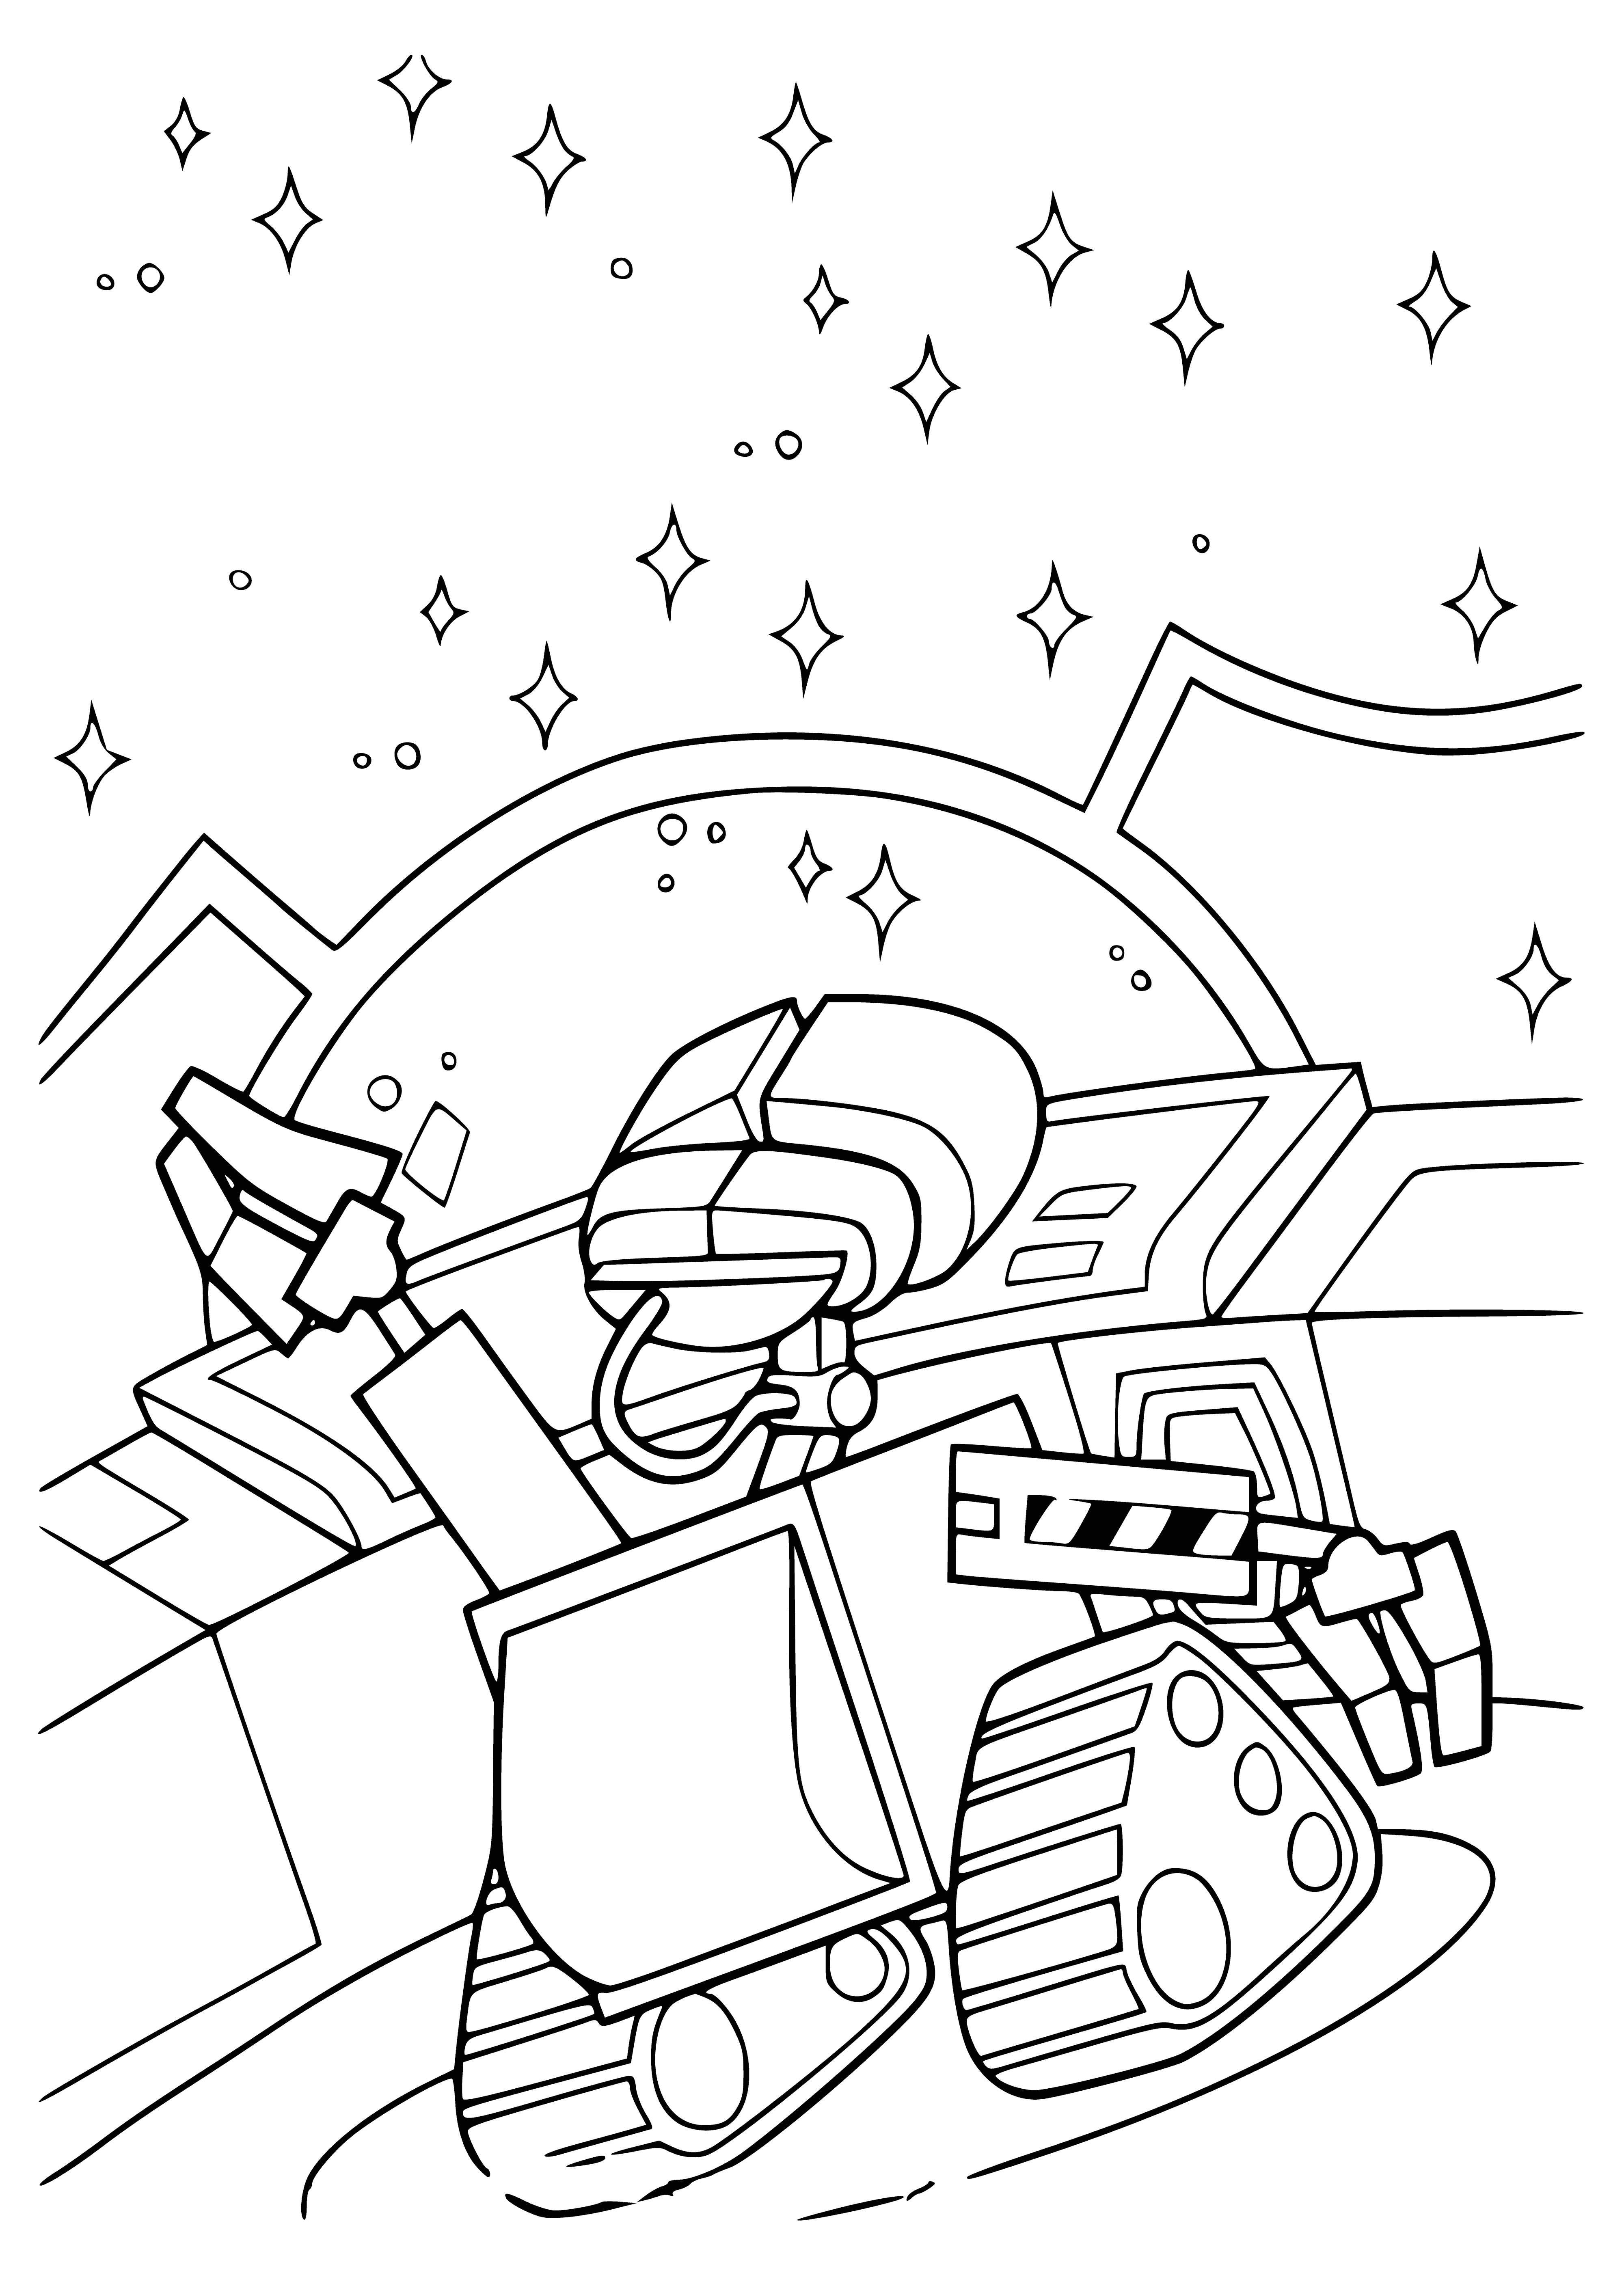 Valley and stars coloring page